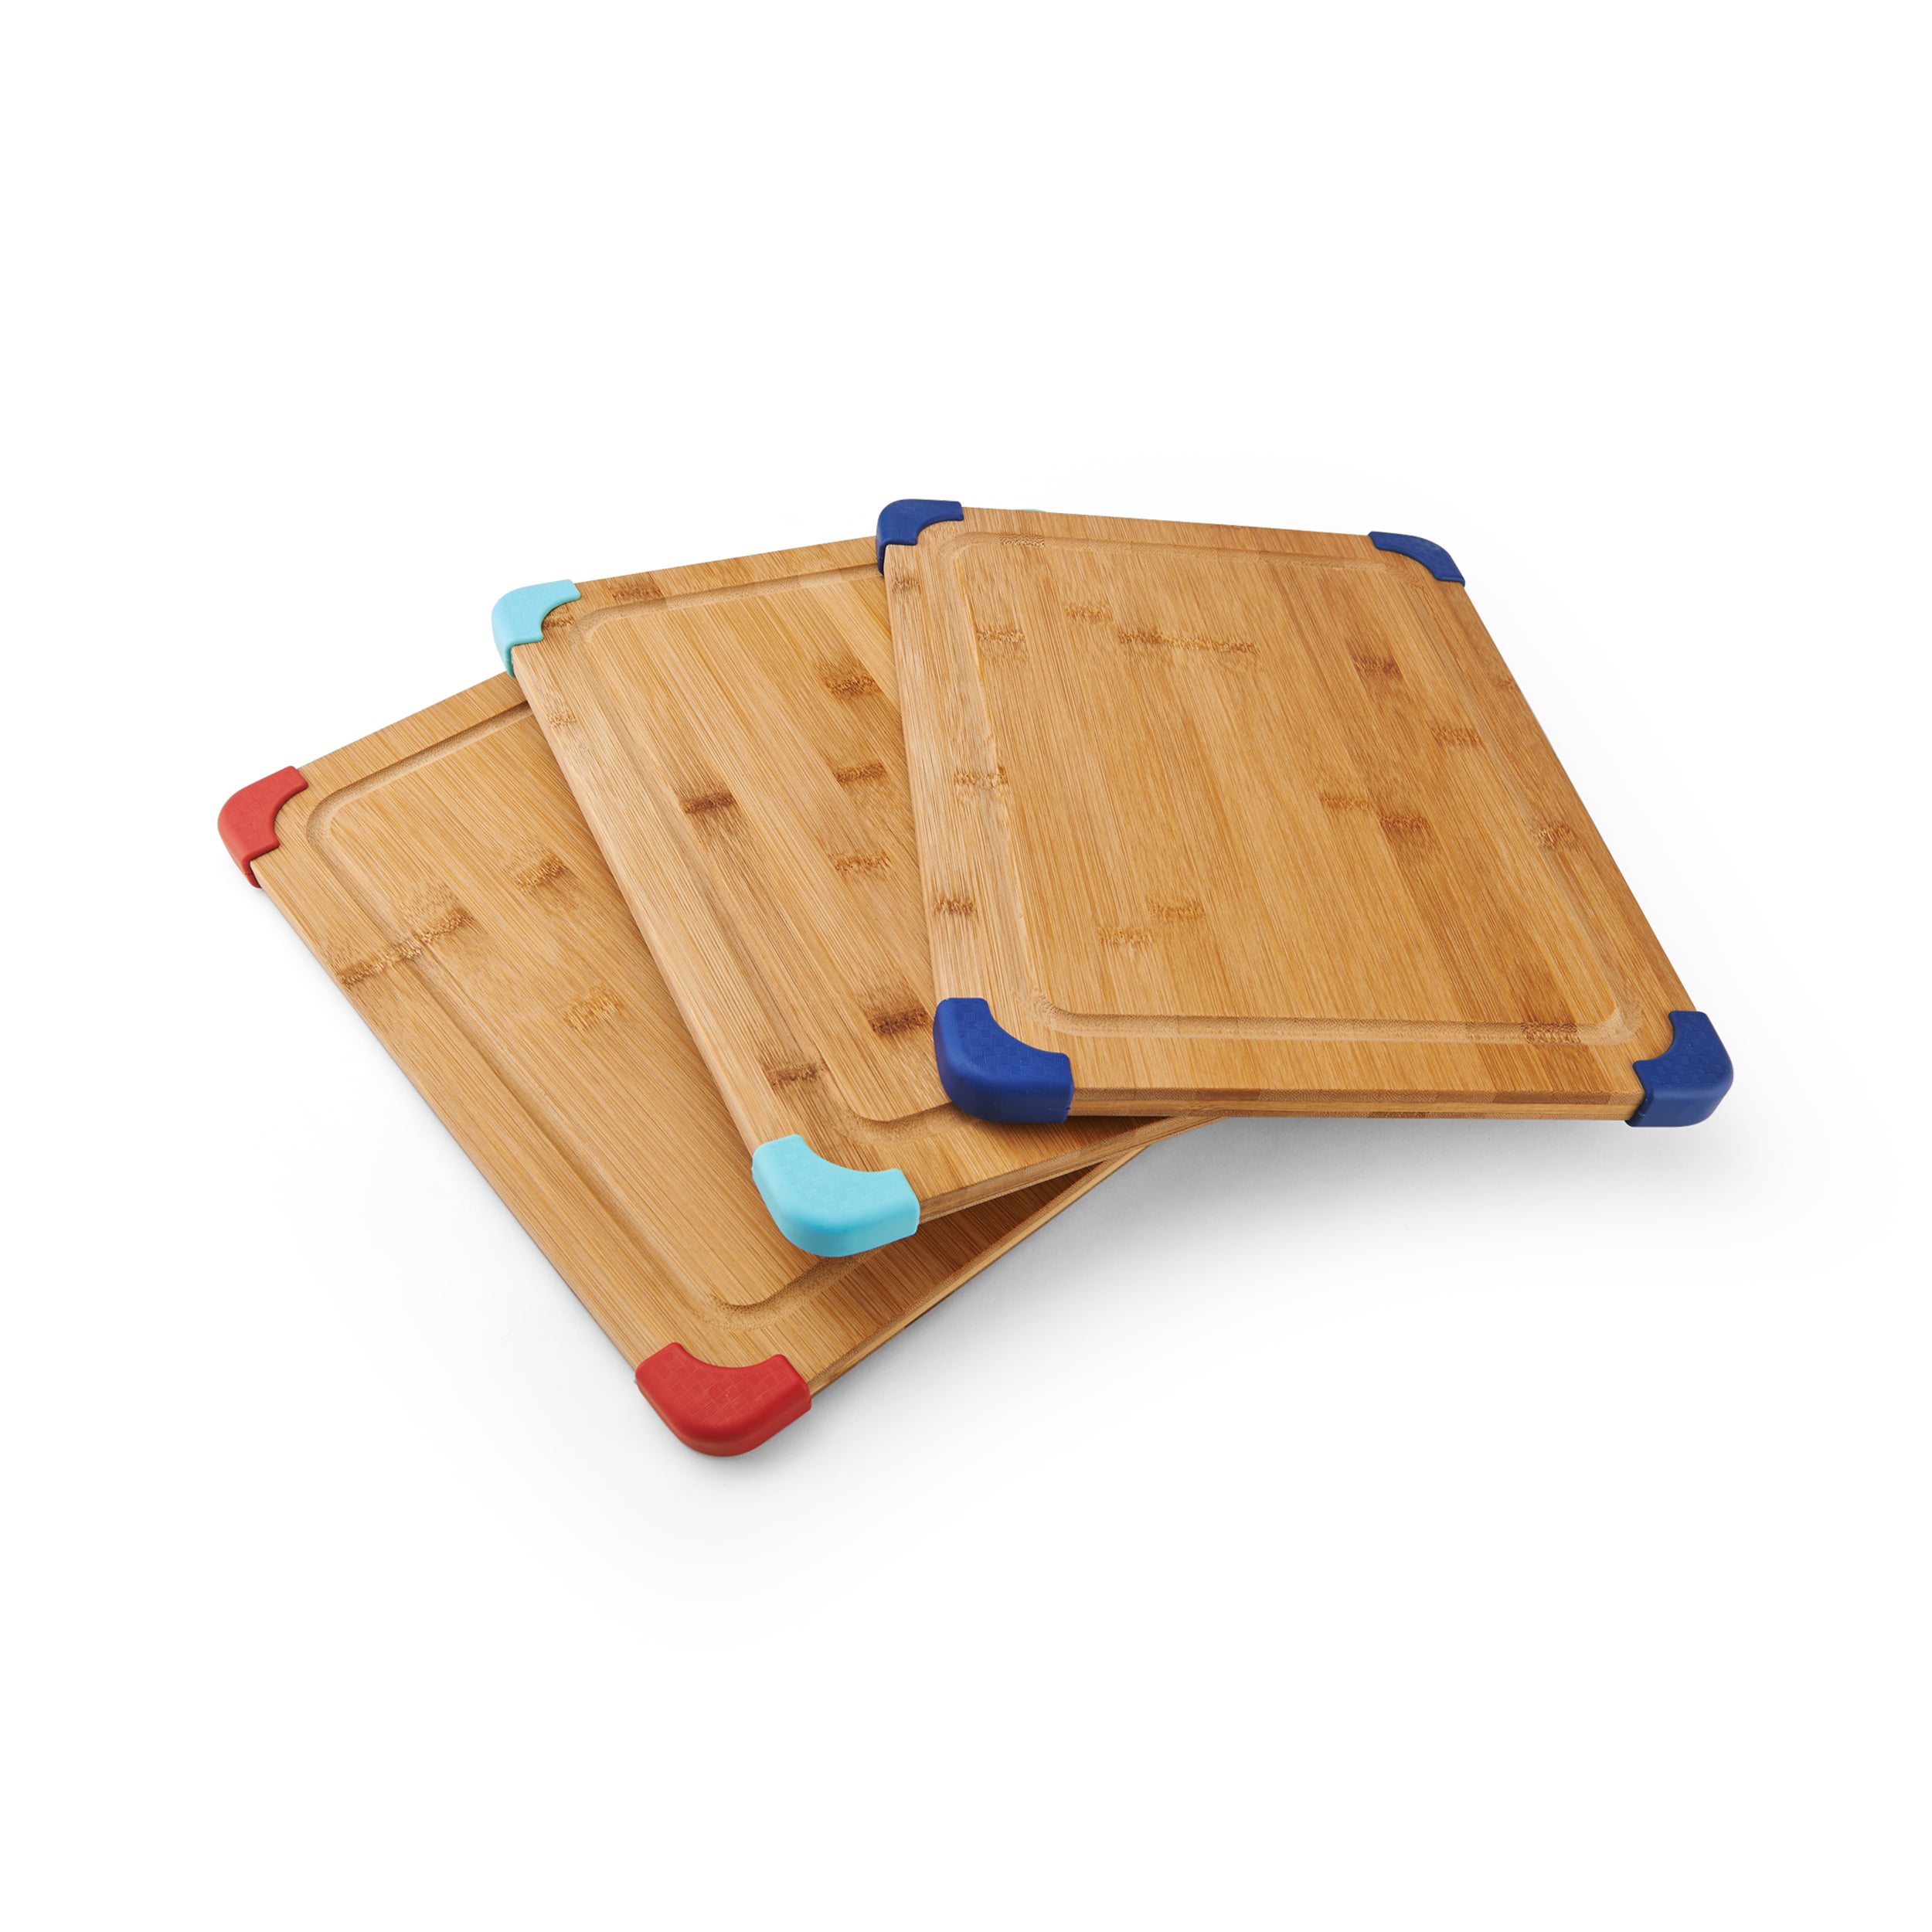 Set of 3 *NEW* PREMIUM Bamboo Cutting Boards Trio Food Meal Prep SHIPS FREE!